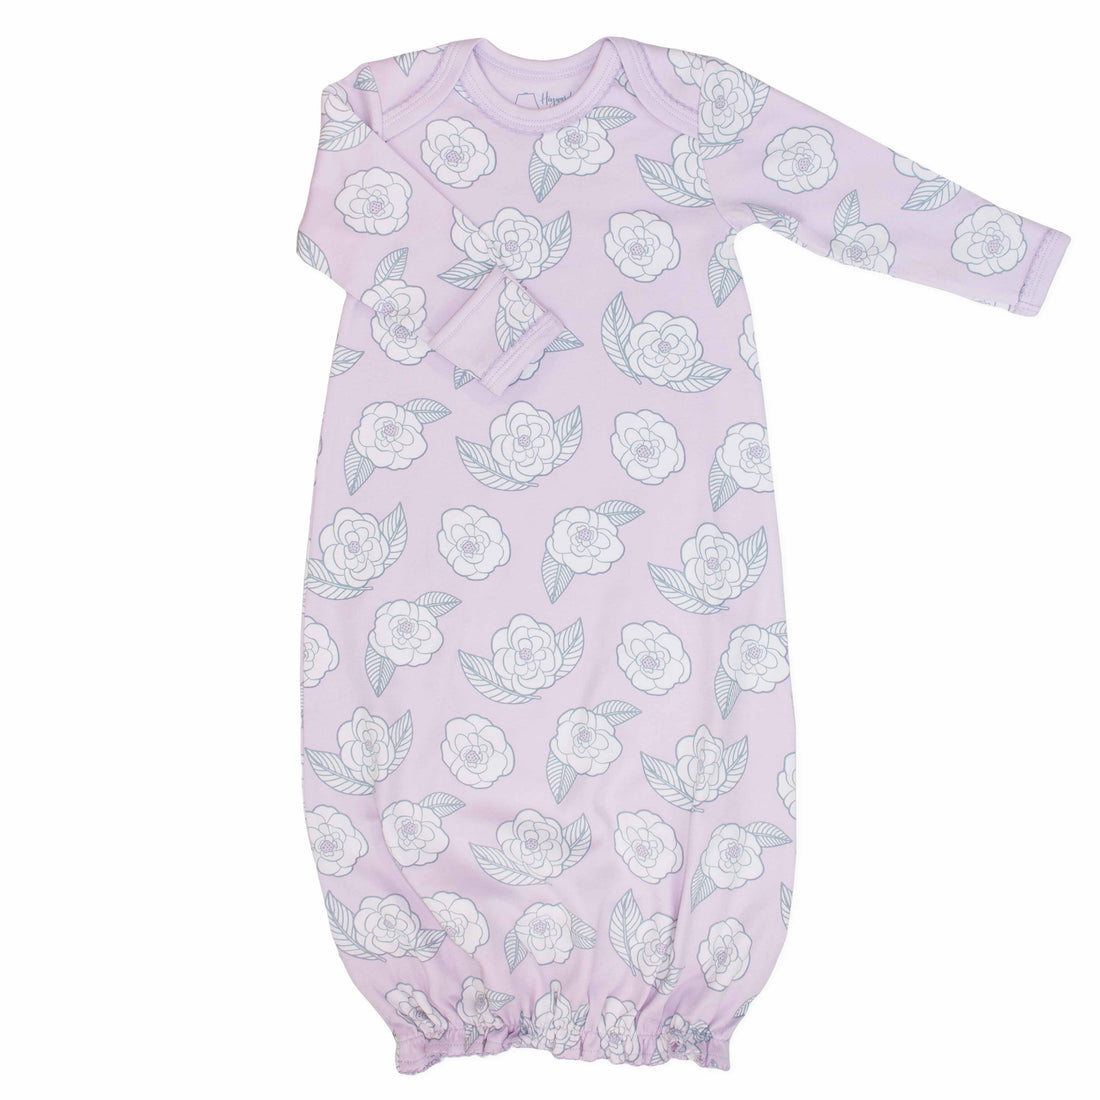 Pink infant gown with camellia flower pattern made in pima cotton